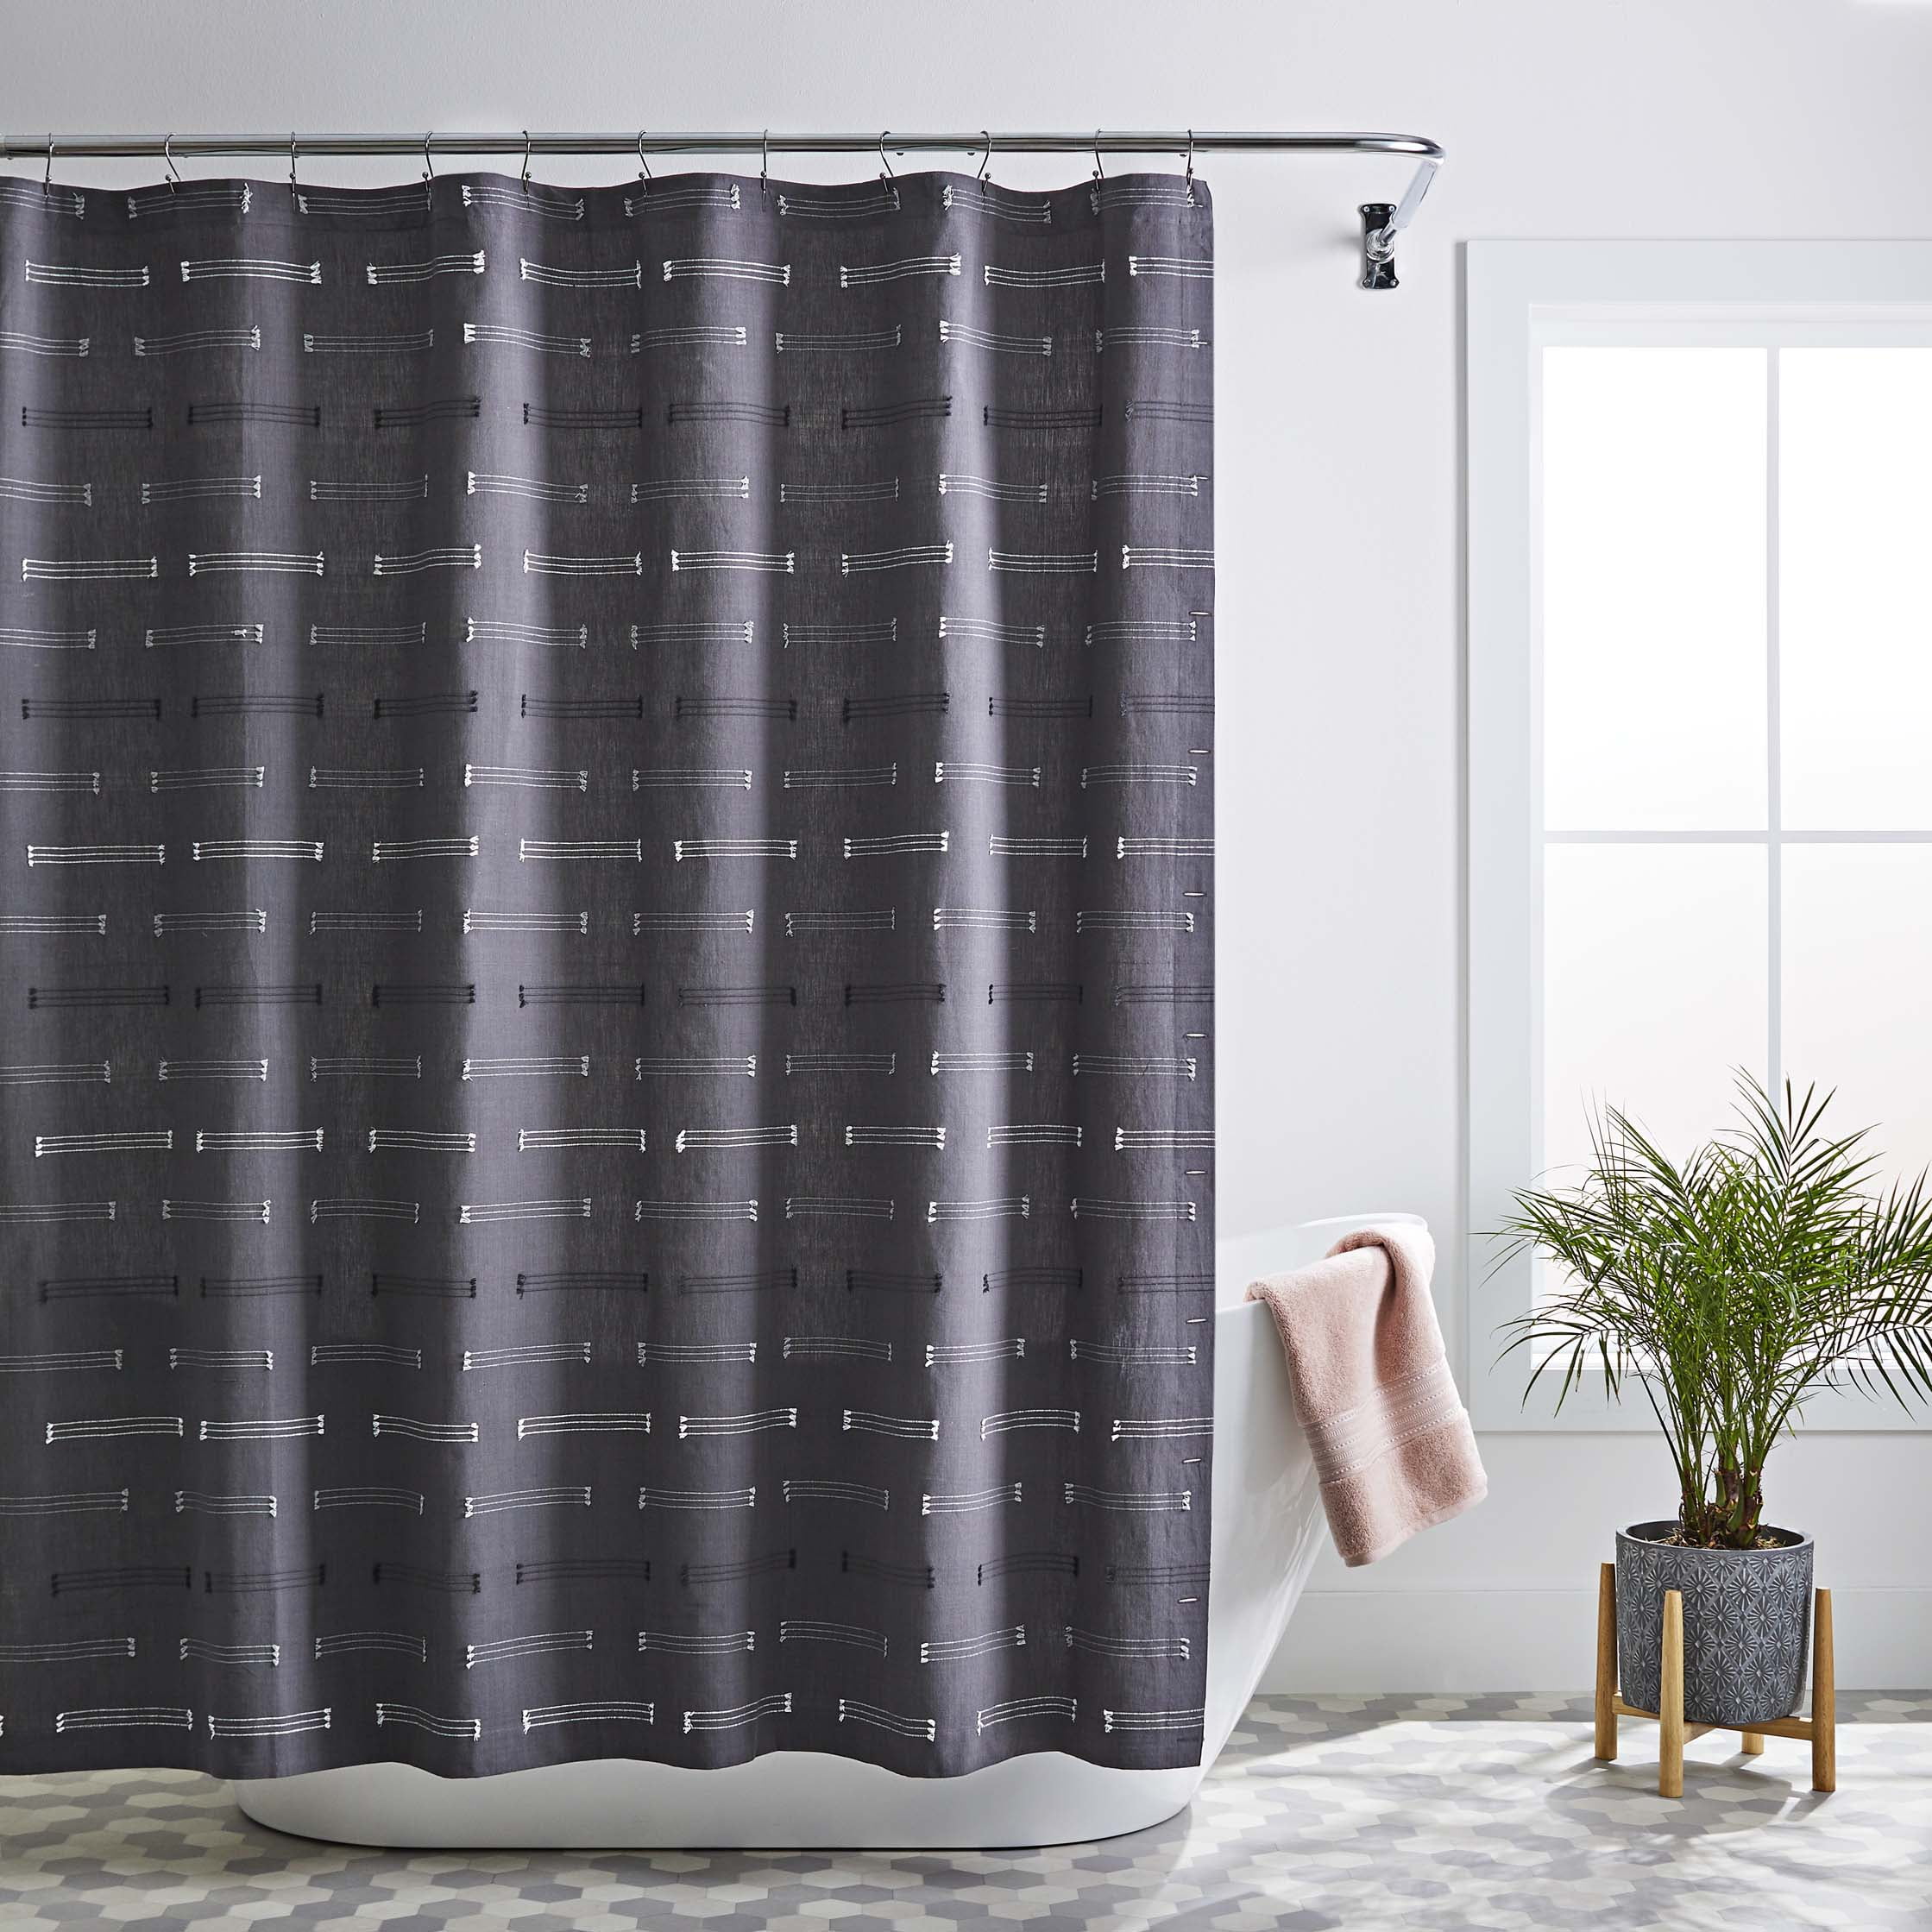 x 72 in. 72 in VCNY Home Black Silver & Gray Geometric Fabric Shower Curtain 